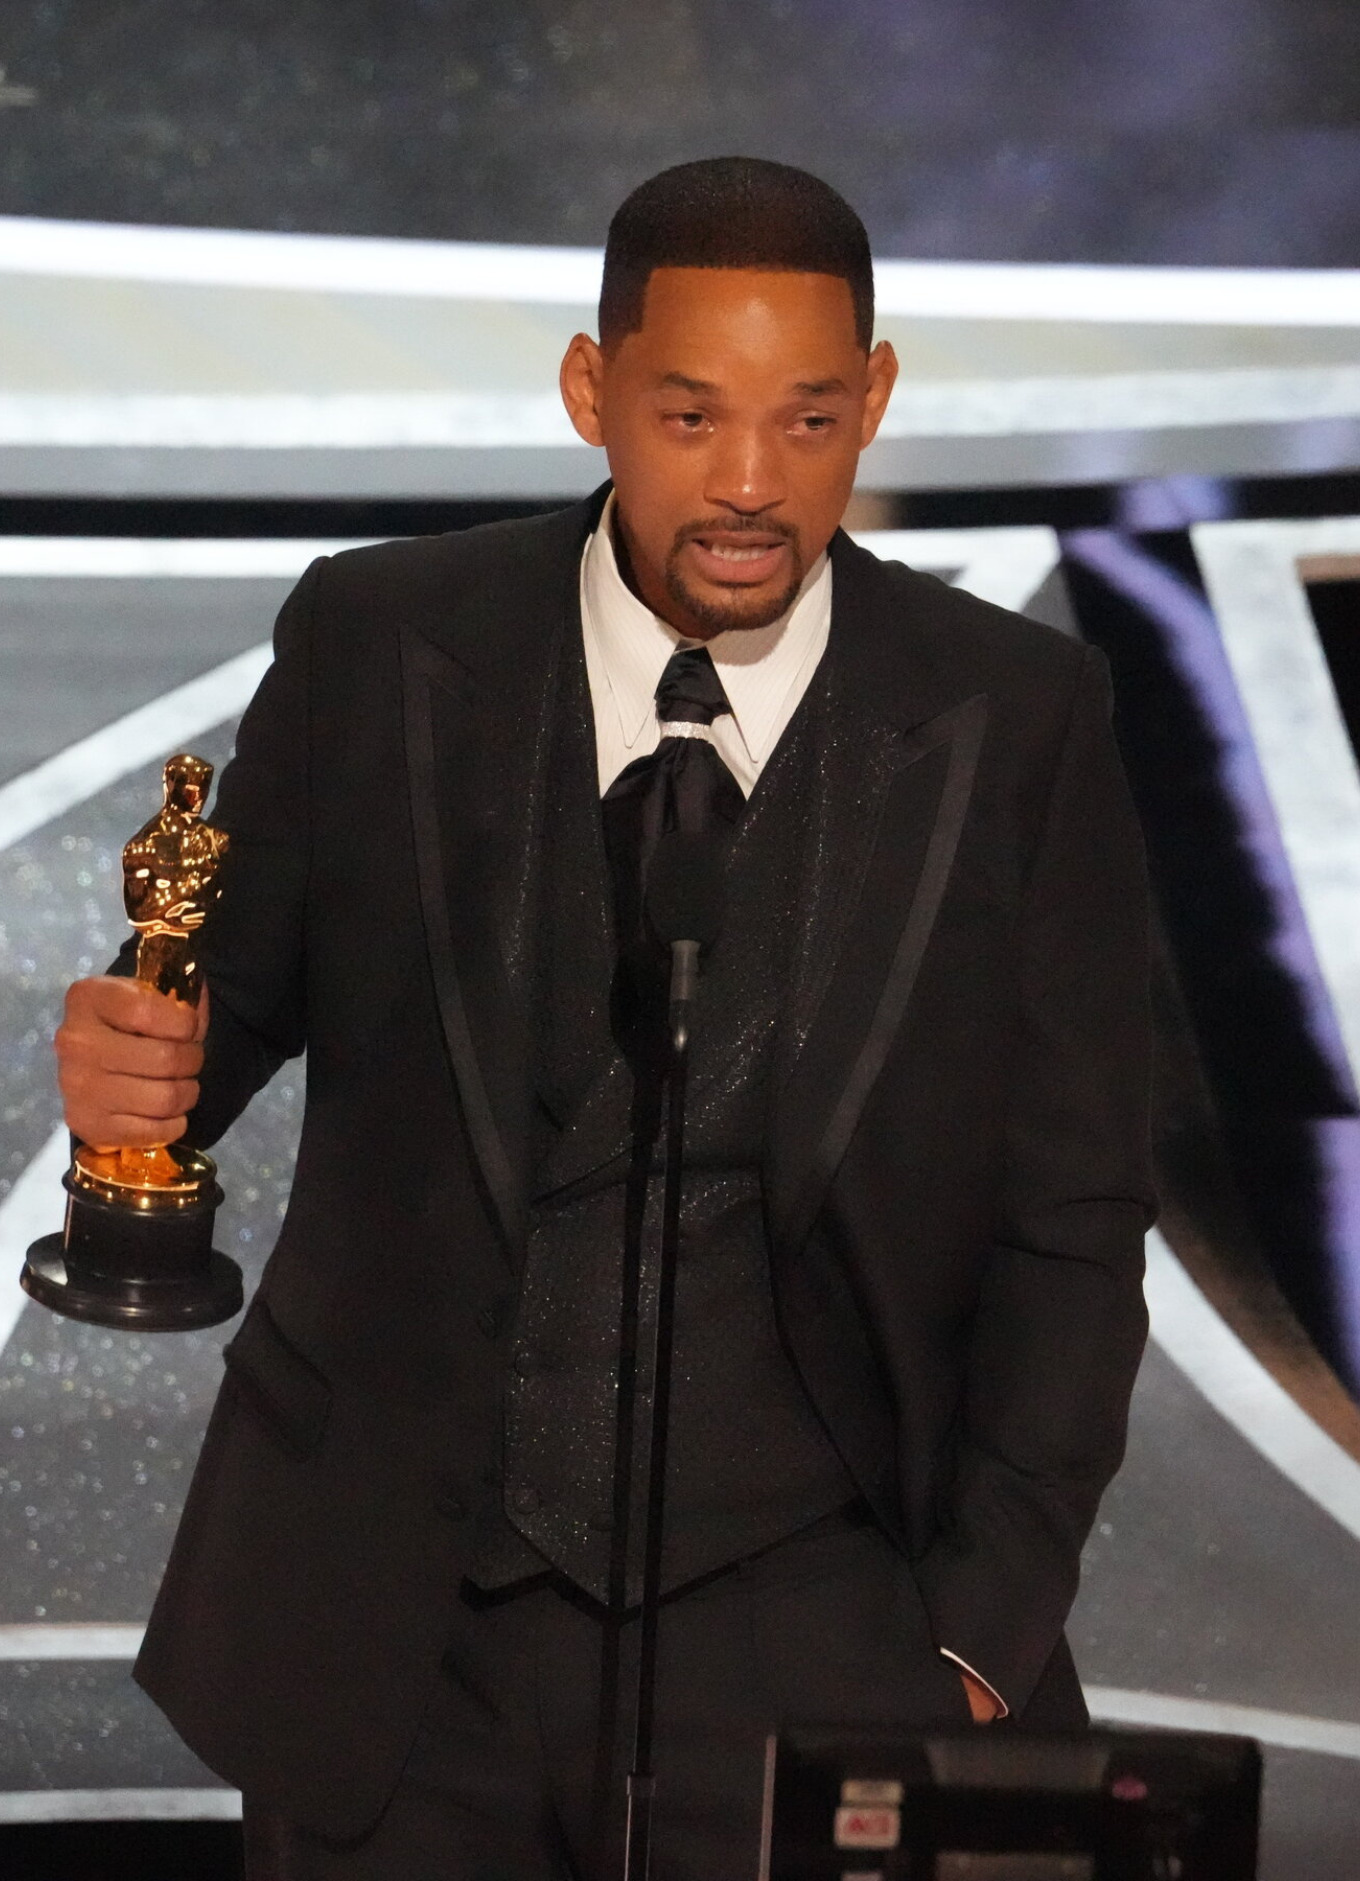 Will Smith accepts his first Academy Award for King Richard.